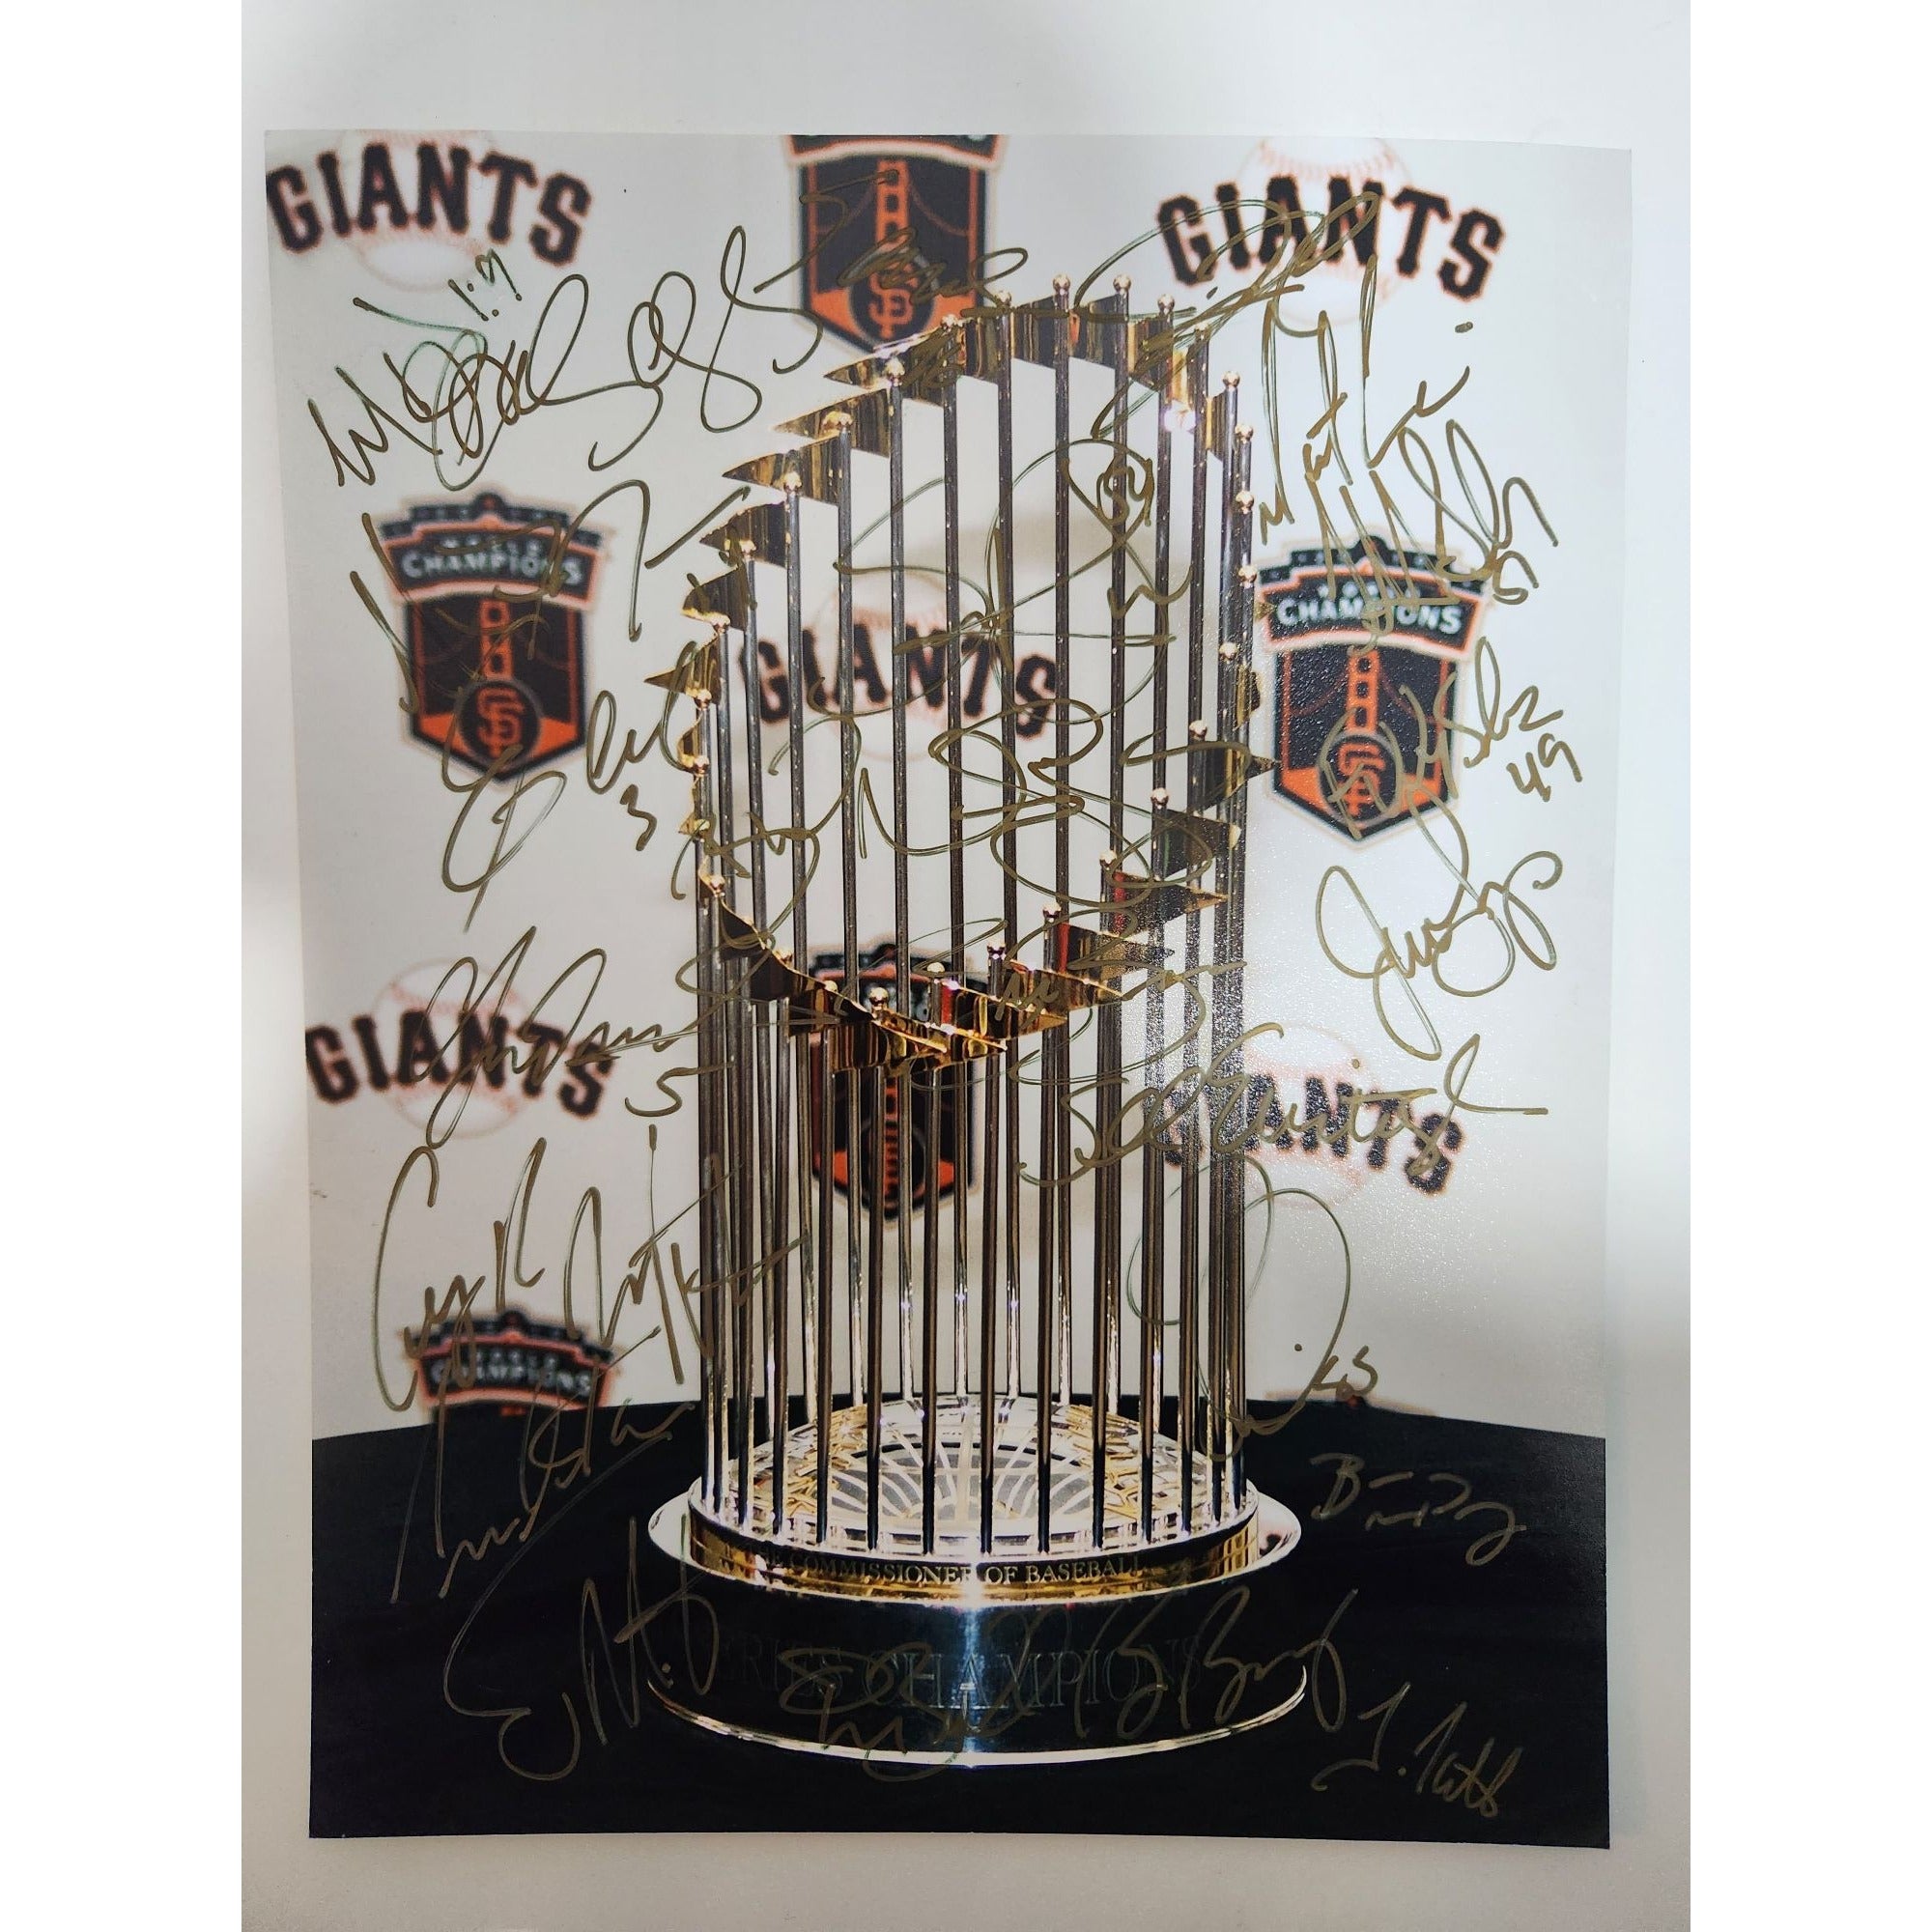 Buster Posey Bruce Bochy Tim Lincecum 2010 San Francisco Giants team signed 11x14 photo